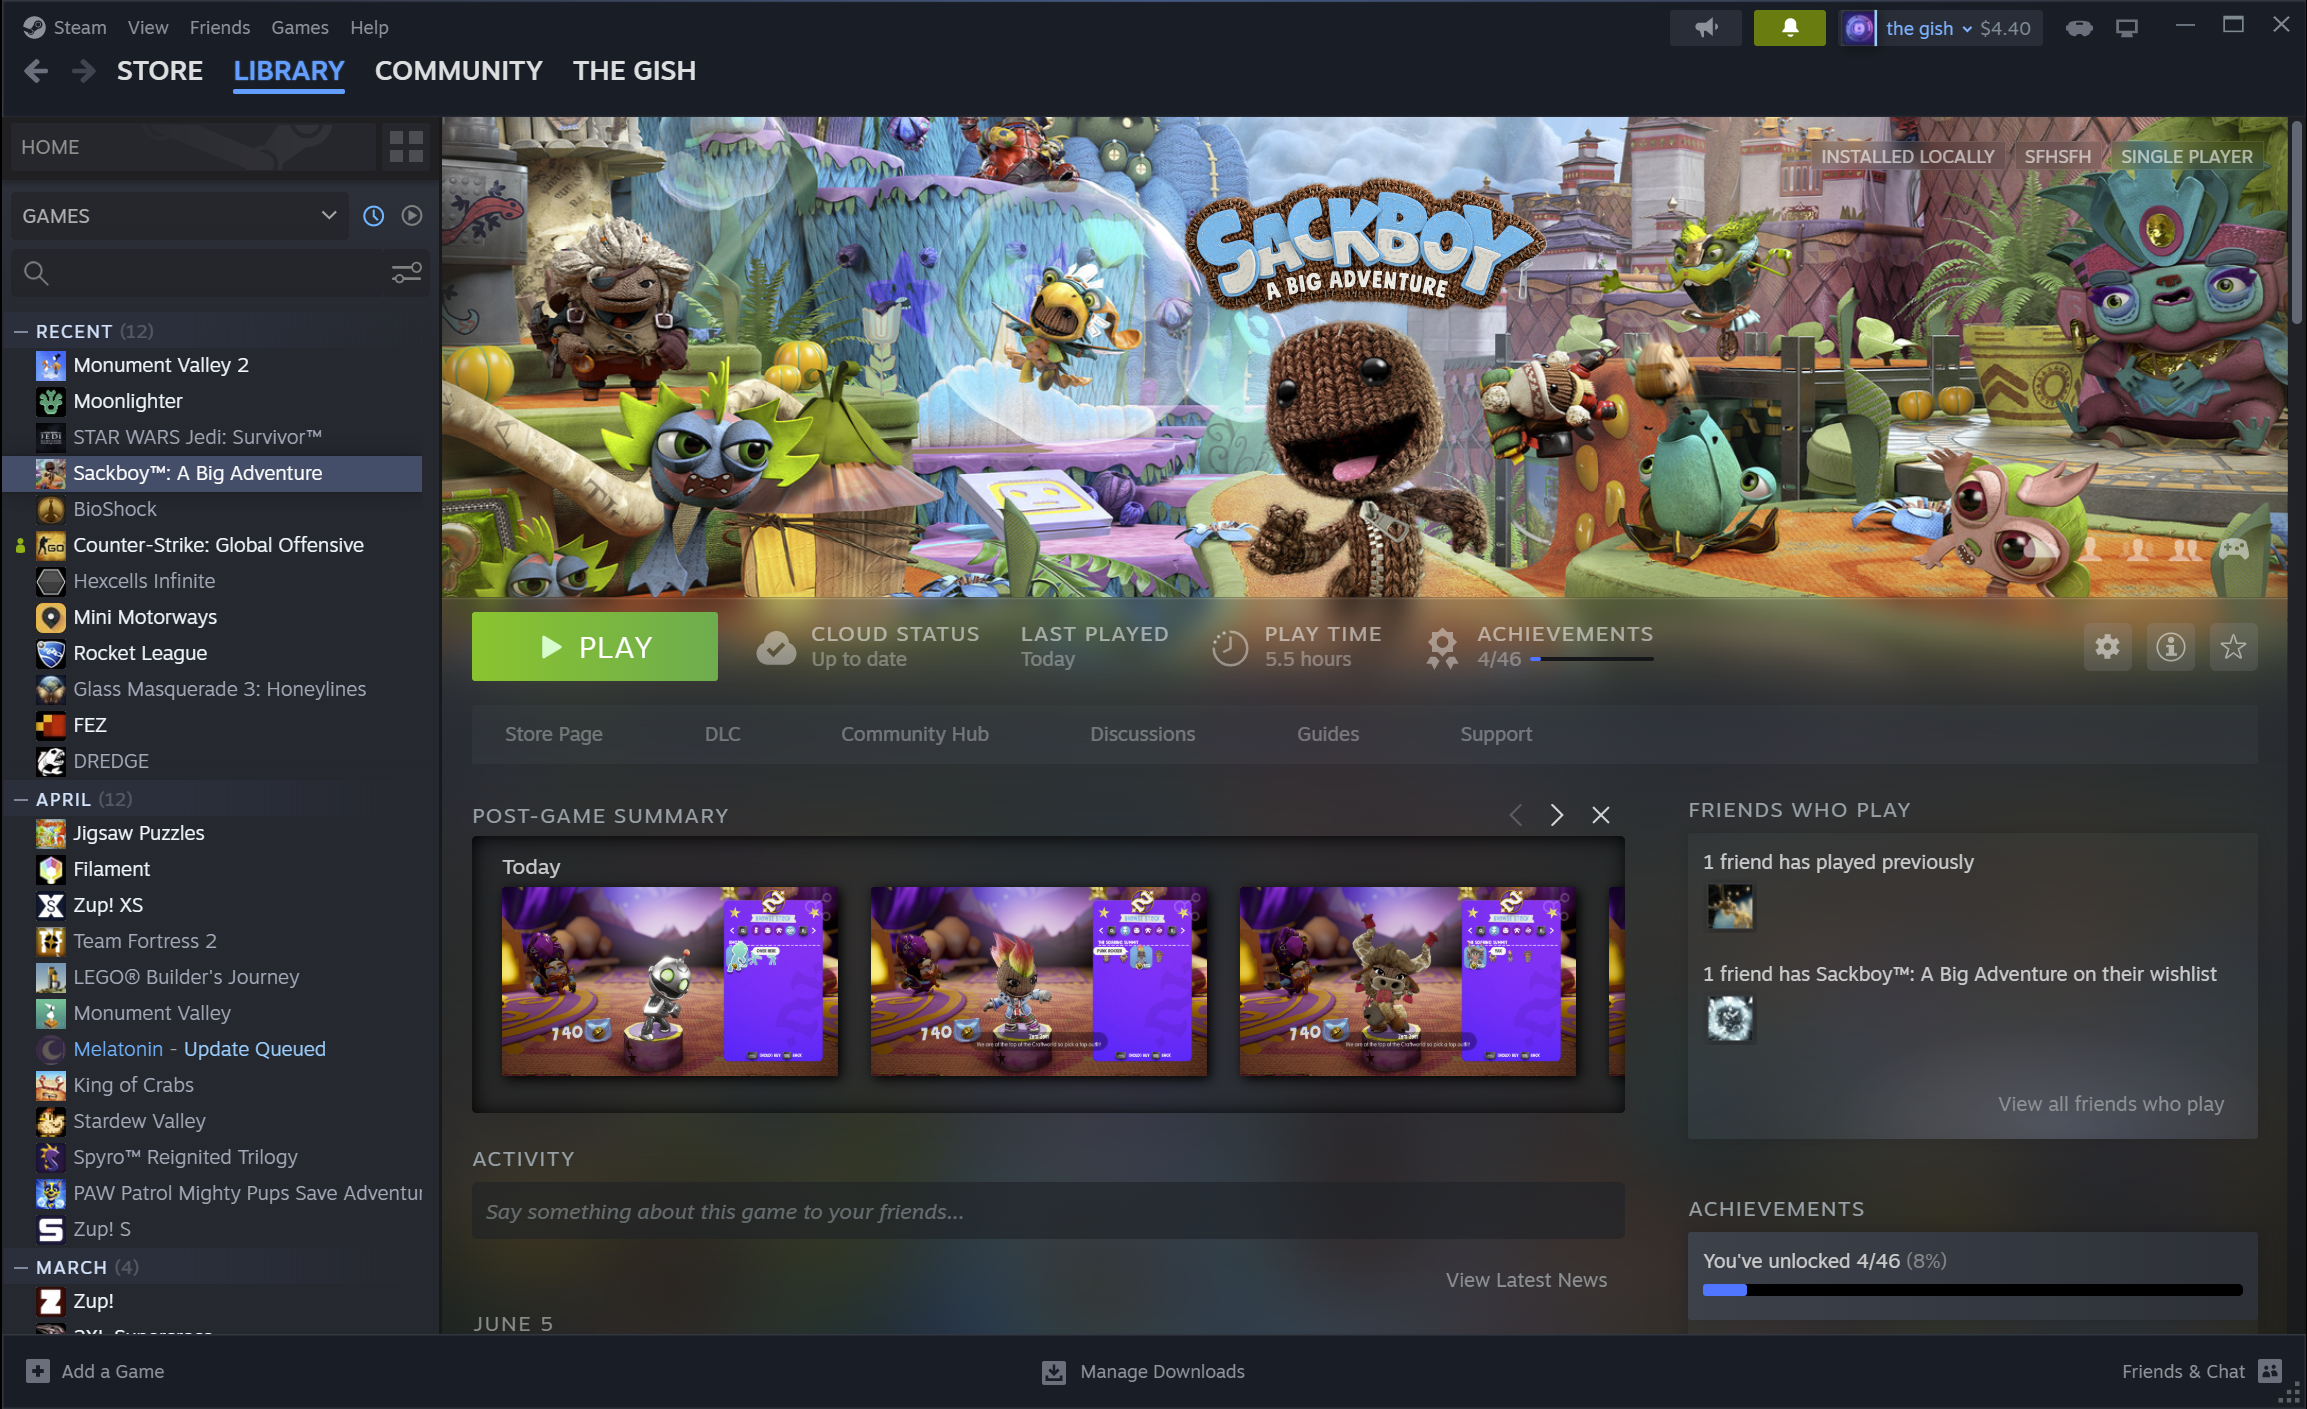 Valve gives Steam its biggest update and redesign in years